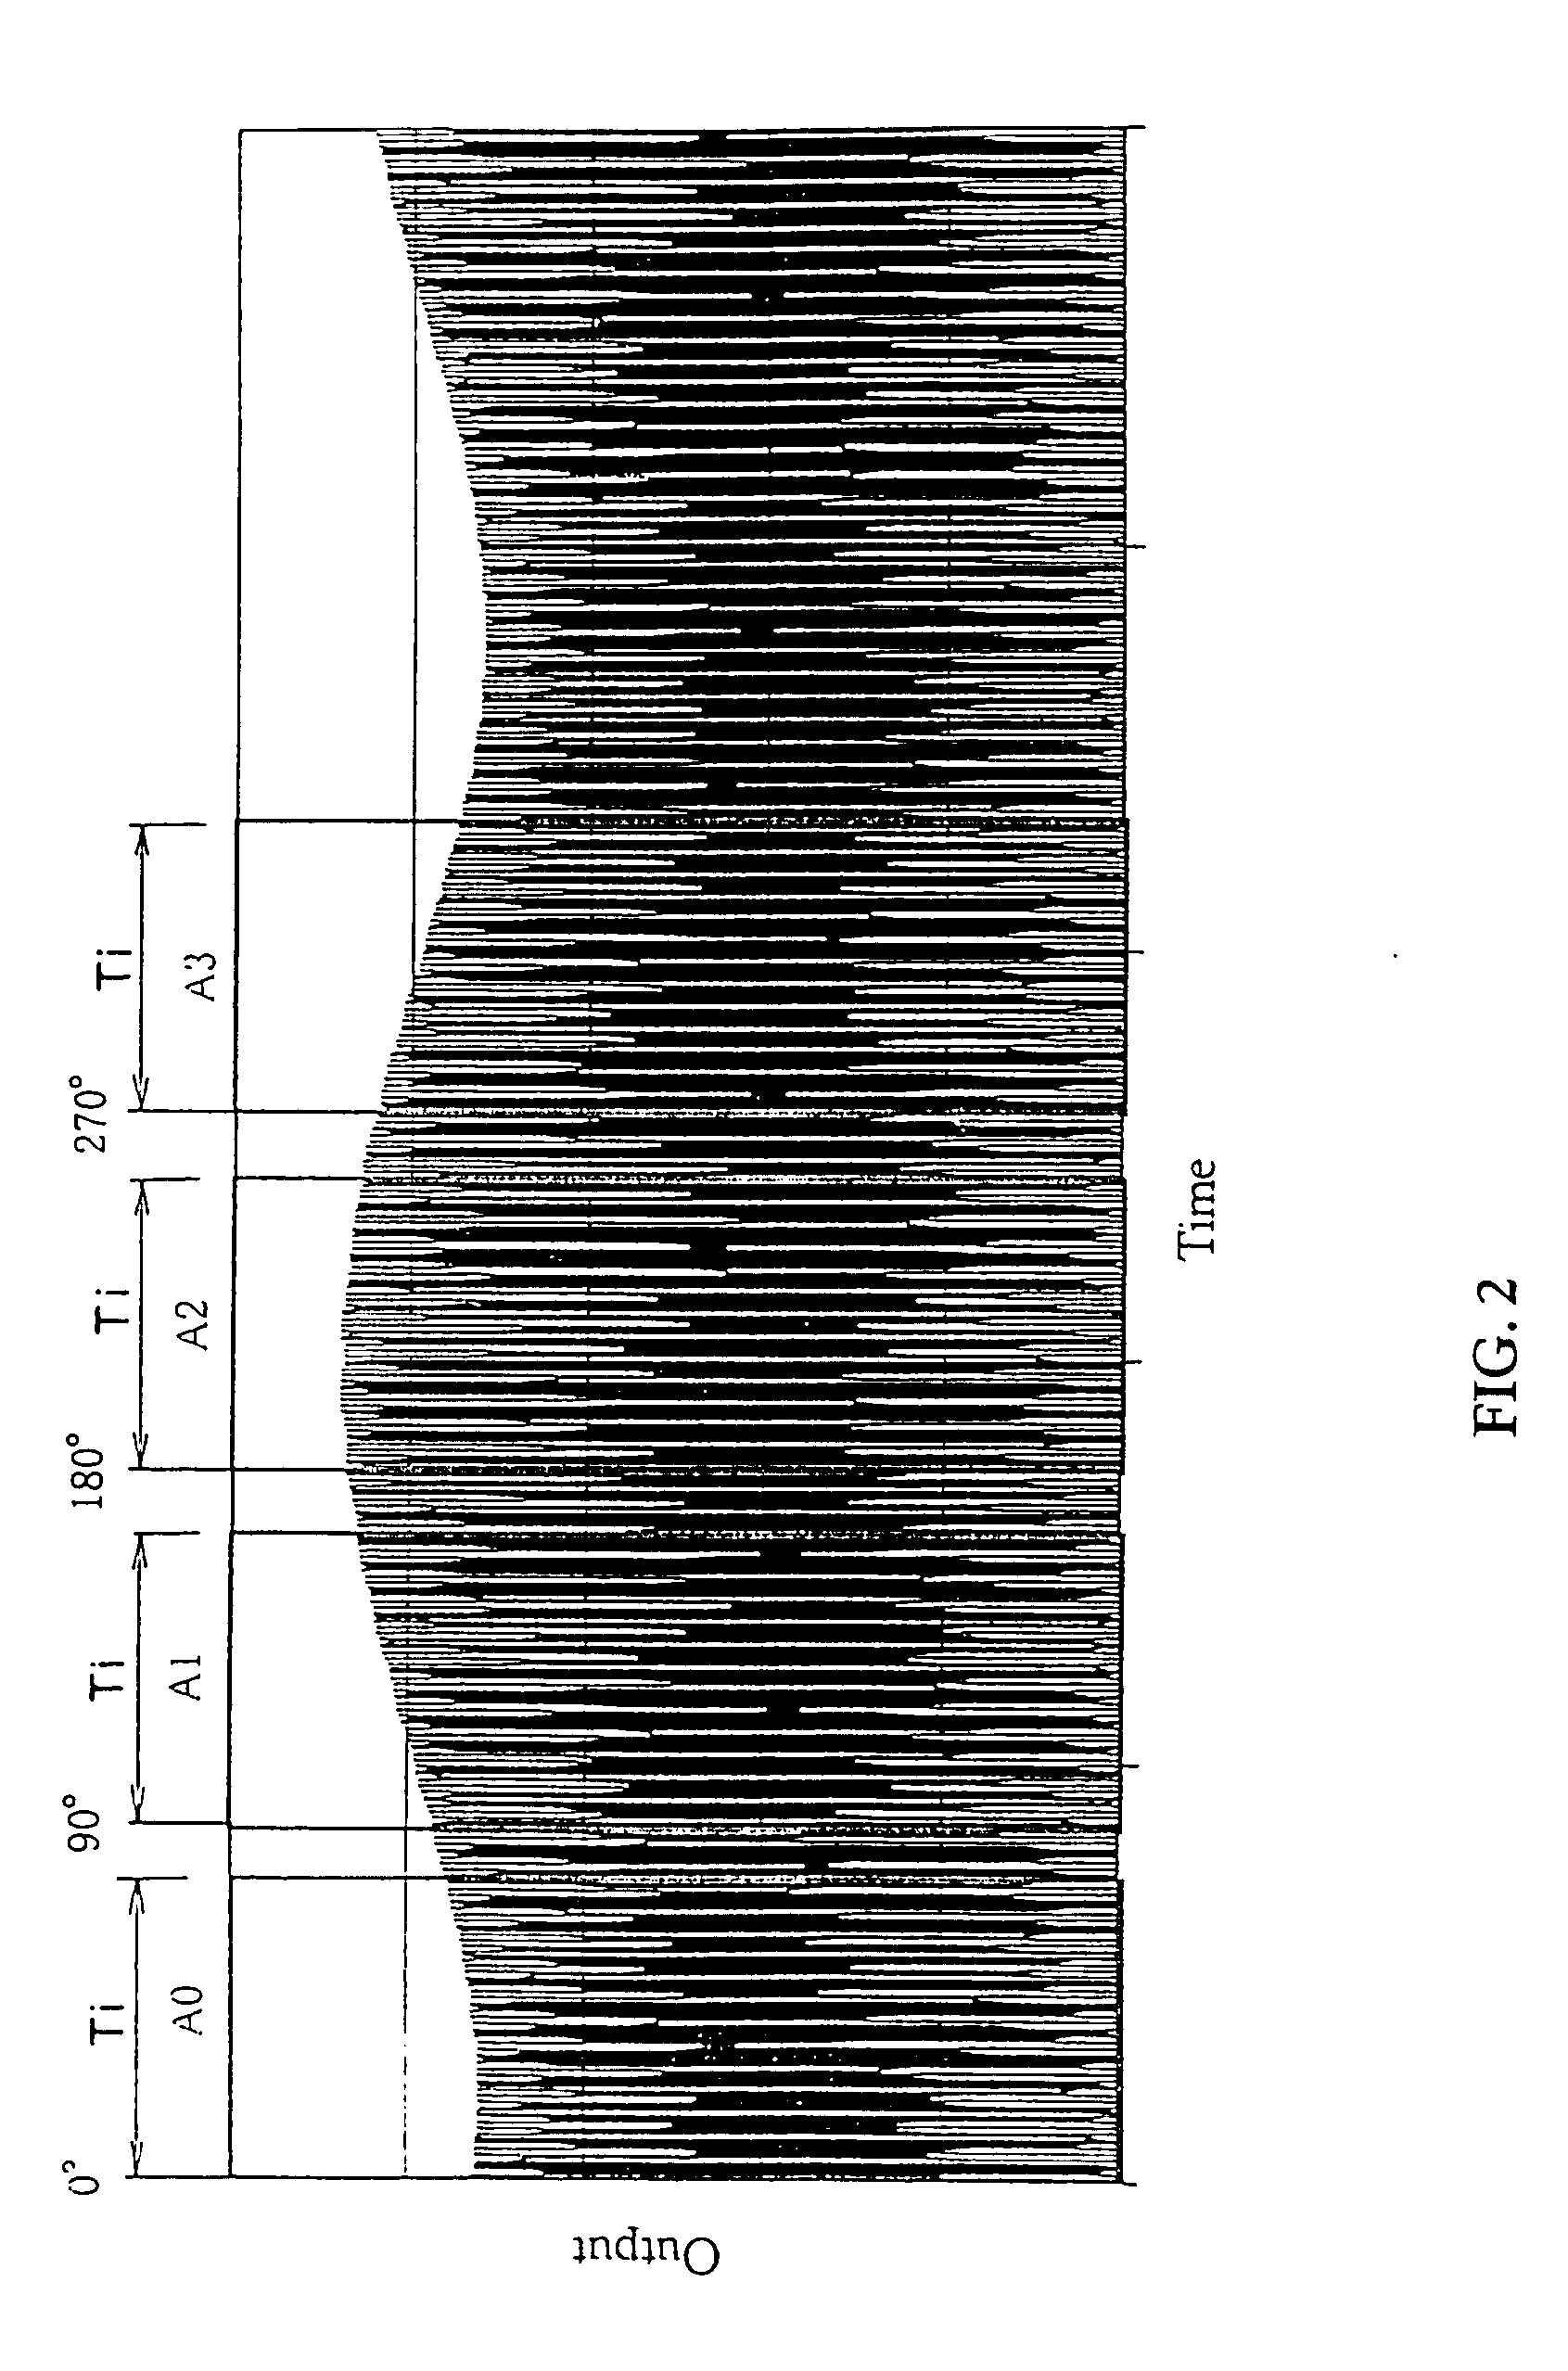 Spatial information detecting device using intensity-modulated light